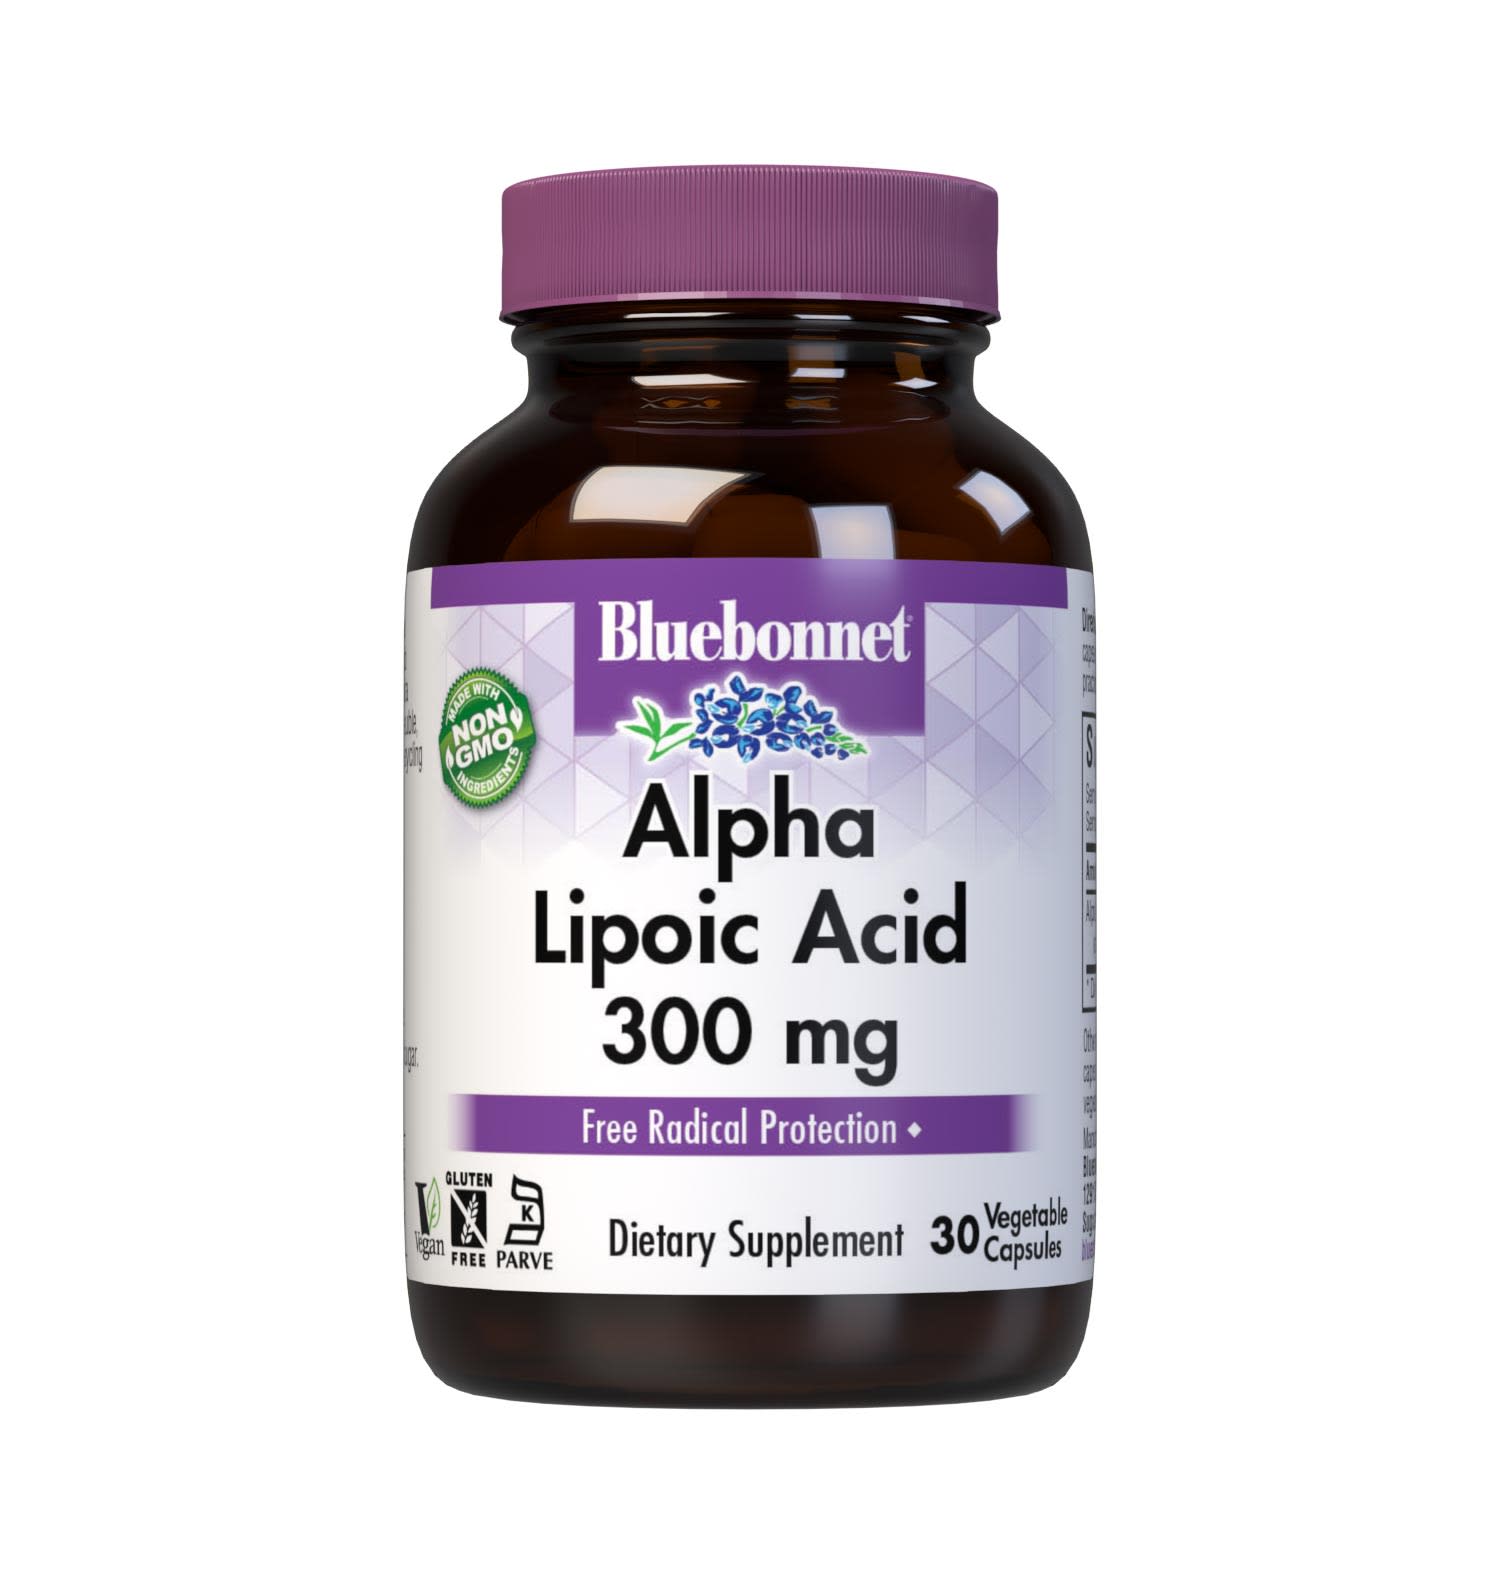 Bluebonnet's Alpha Lipoic Acid 300 mg 30 Vegetable Capsules are formulated with the powerful free radical scavenger alpha lipoic acid in its crystalline form. Alpha lipoic acid is unique in that it is both fat-soluble and water-soluble, and supports the production of glutathione and the recycling of the vitamins C and E for cellular protection. #size_30 count